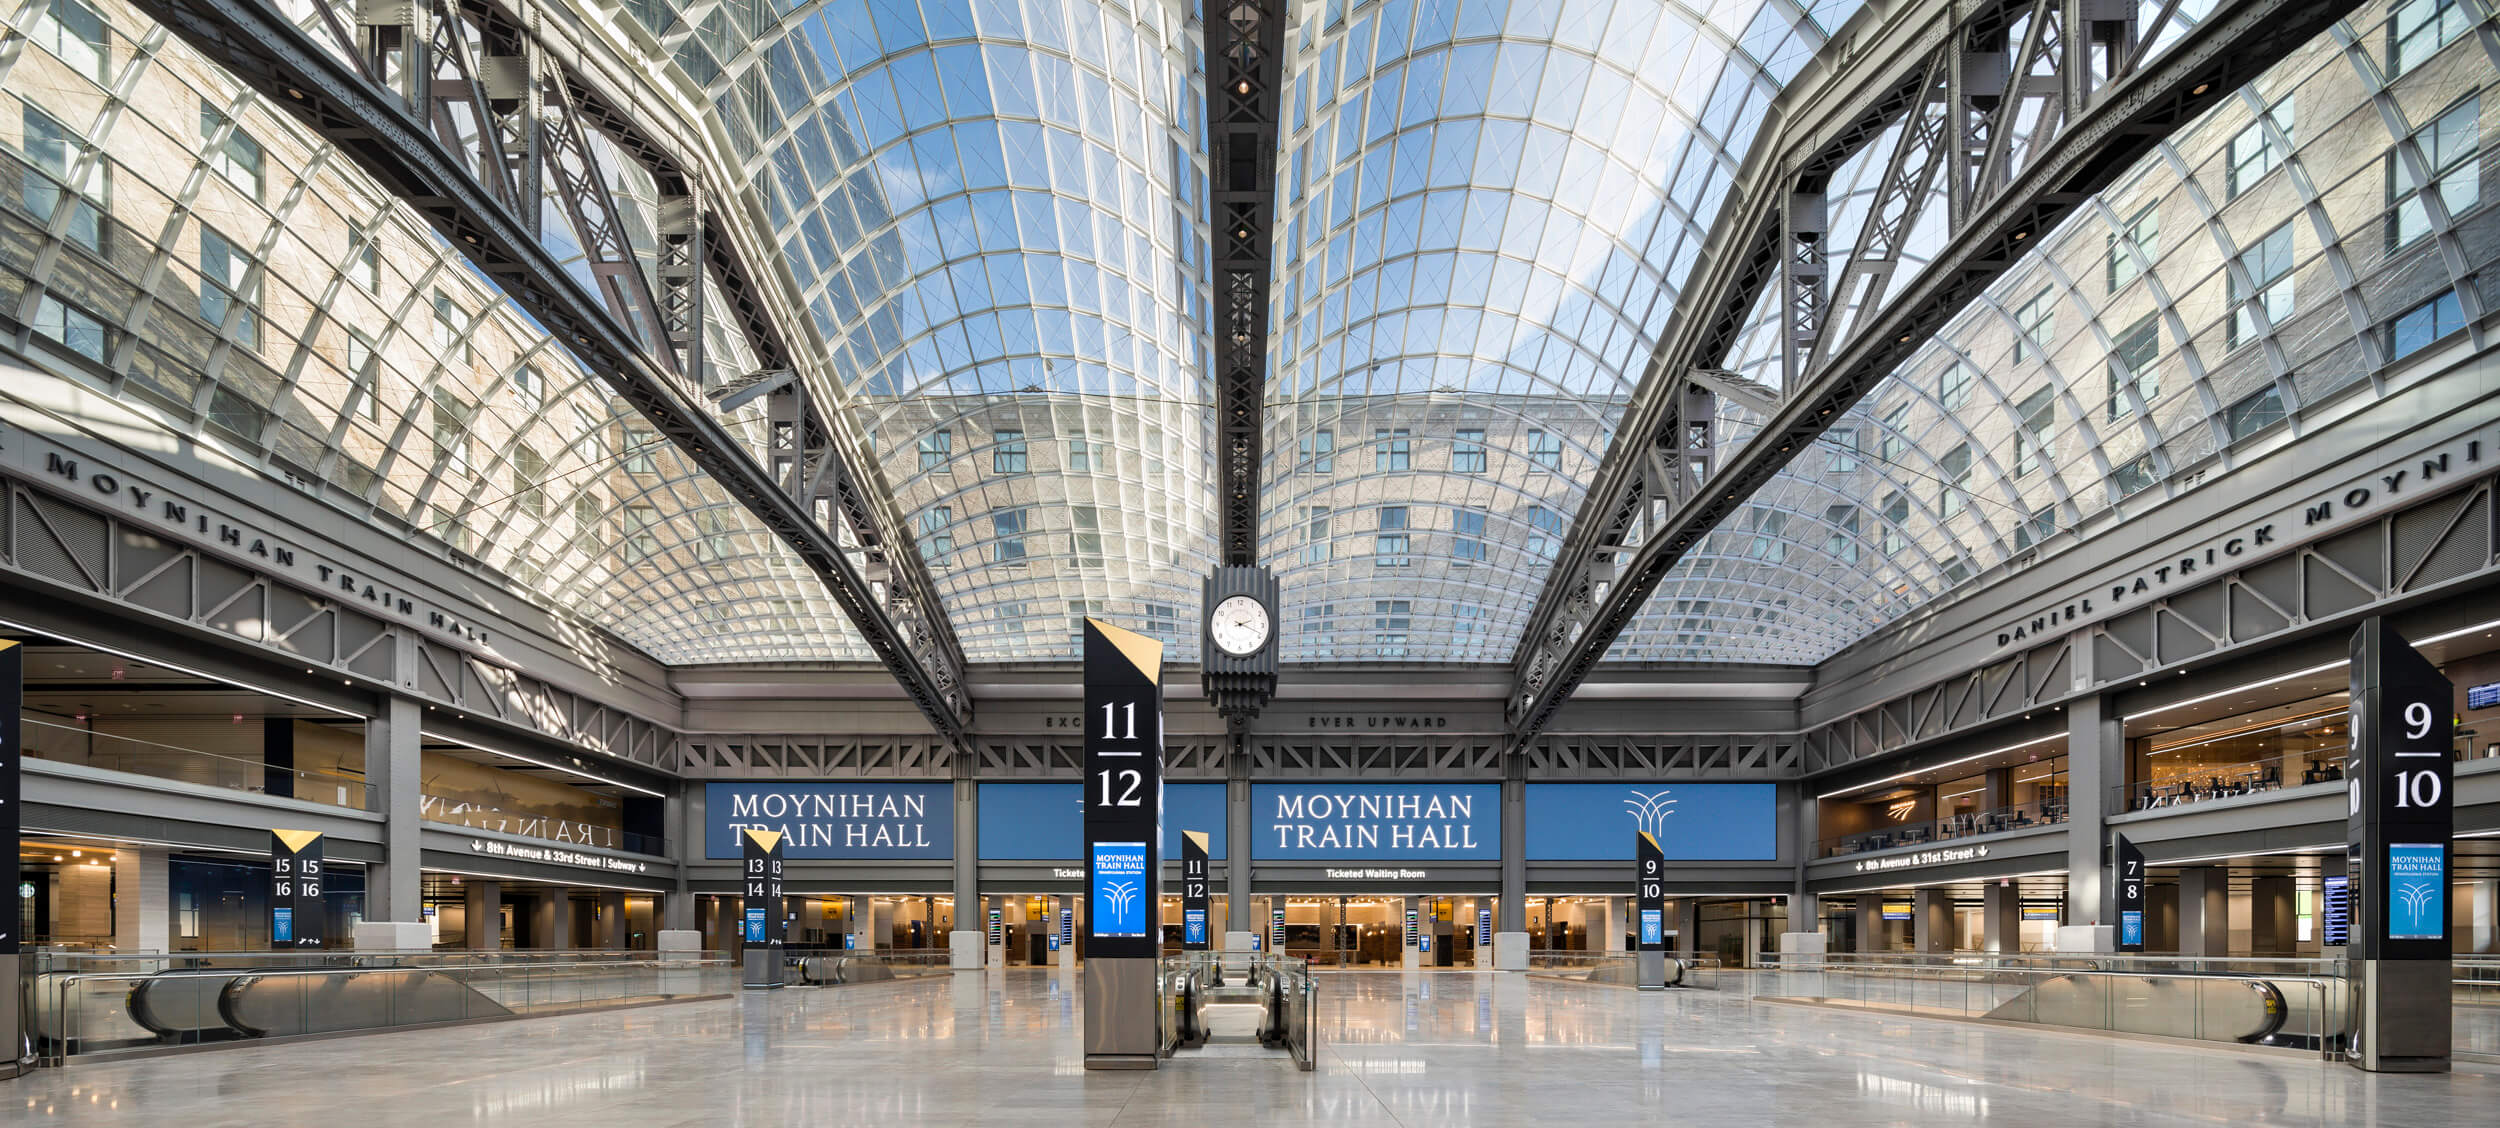 an interior photograph depicting a train concourse with a vaulted glass ceiling in moynihan train hall